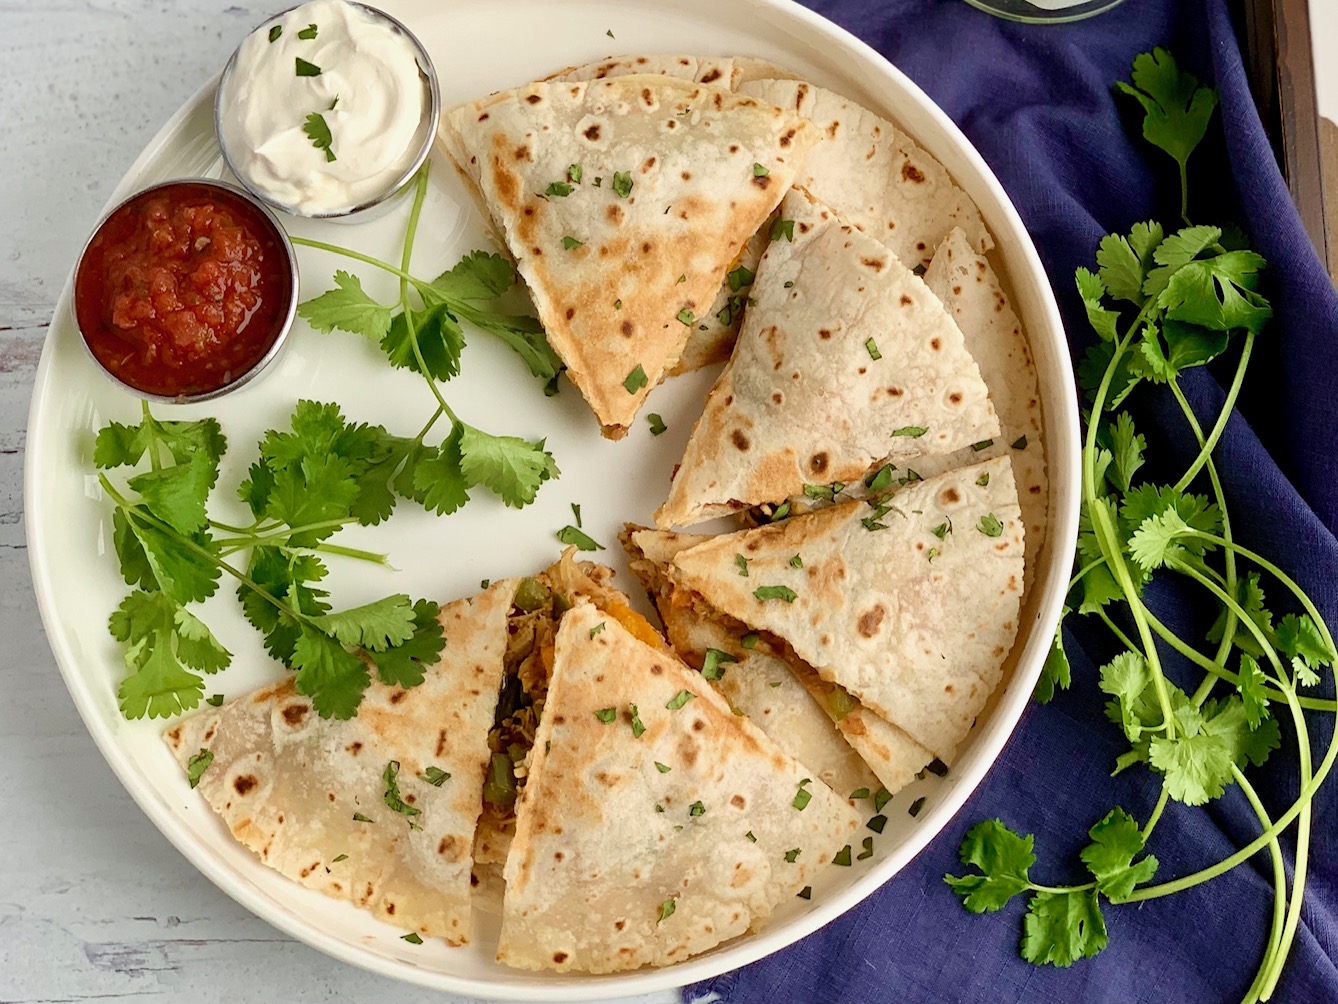 A serving plate of quesadillas cut into triangles and ready to be eaten with a side of dairy free sour cream and salsa.